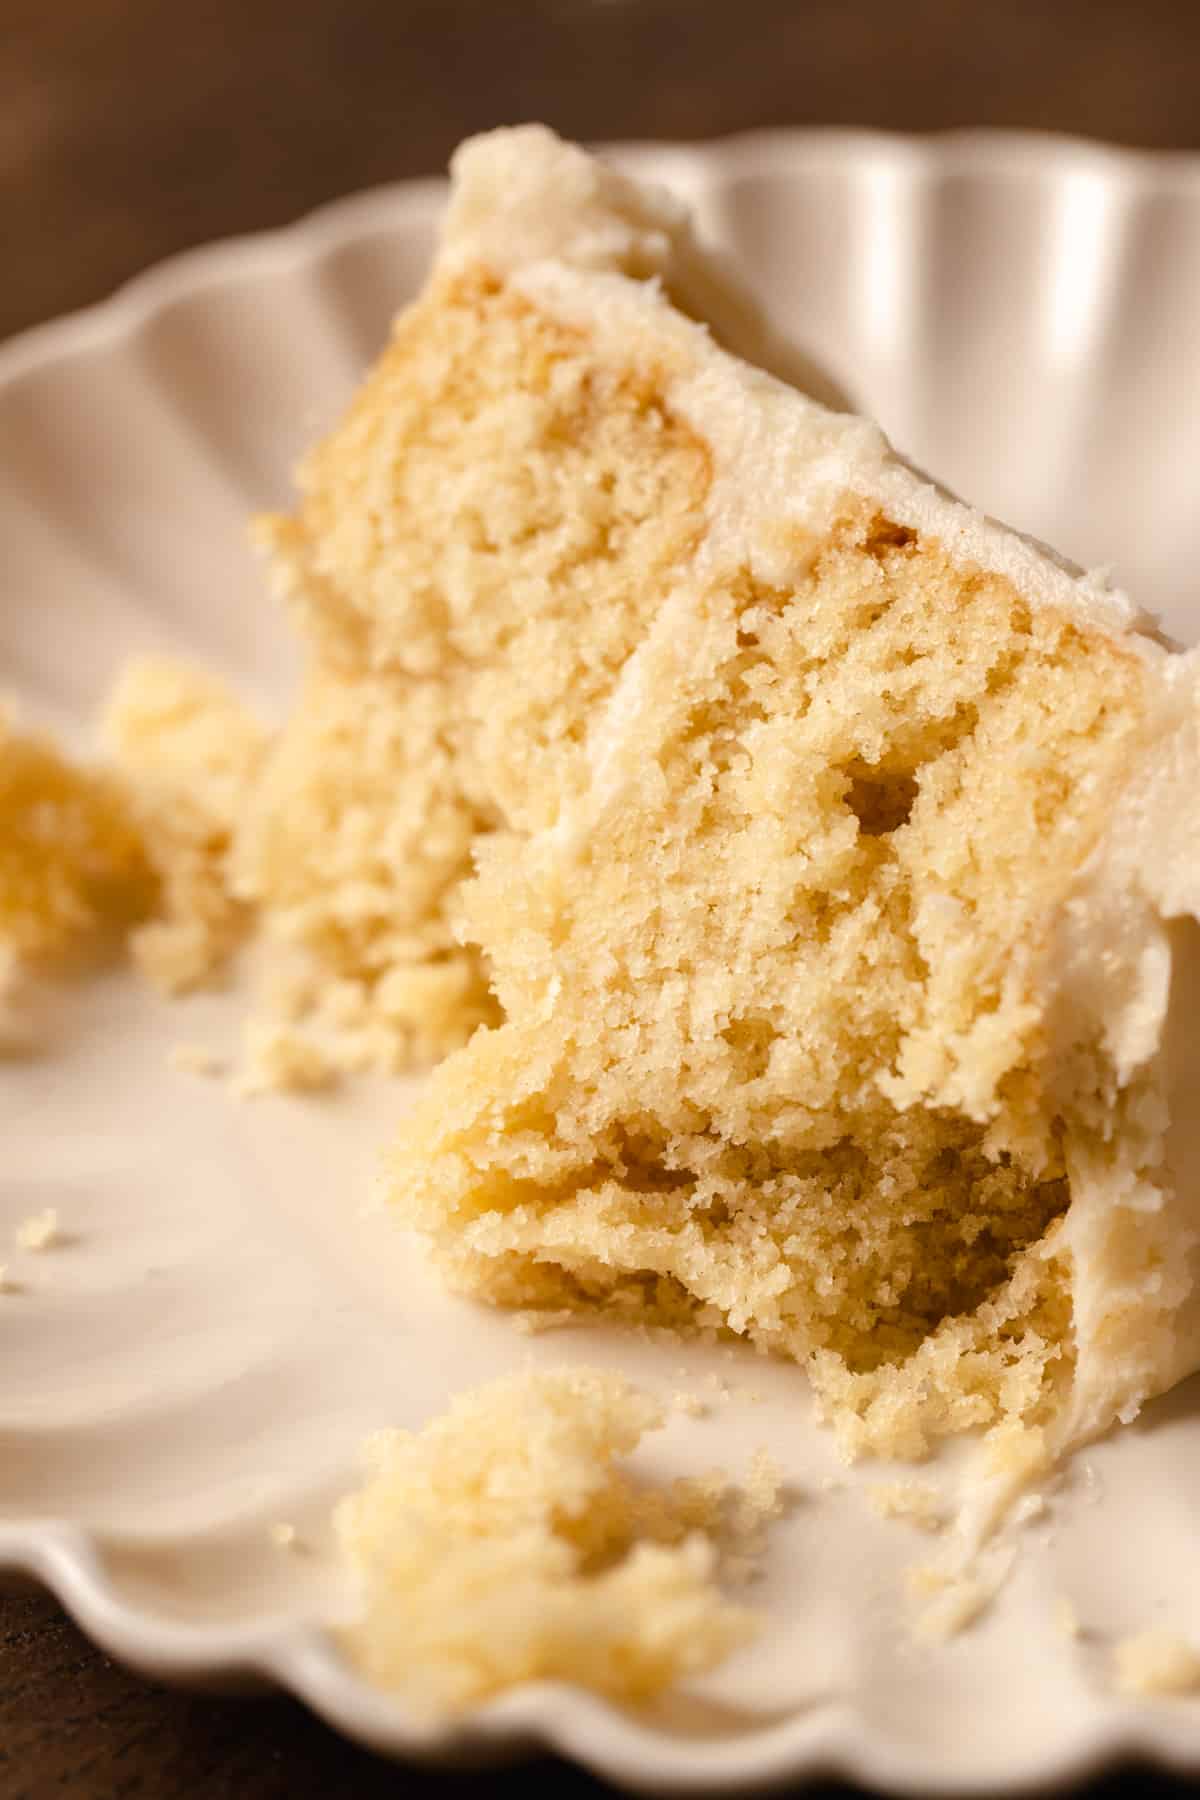 A slice of vanilla cake with bites taken out of it.